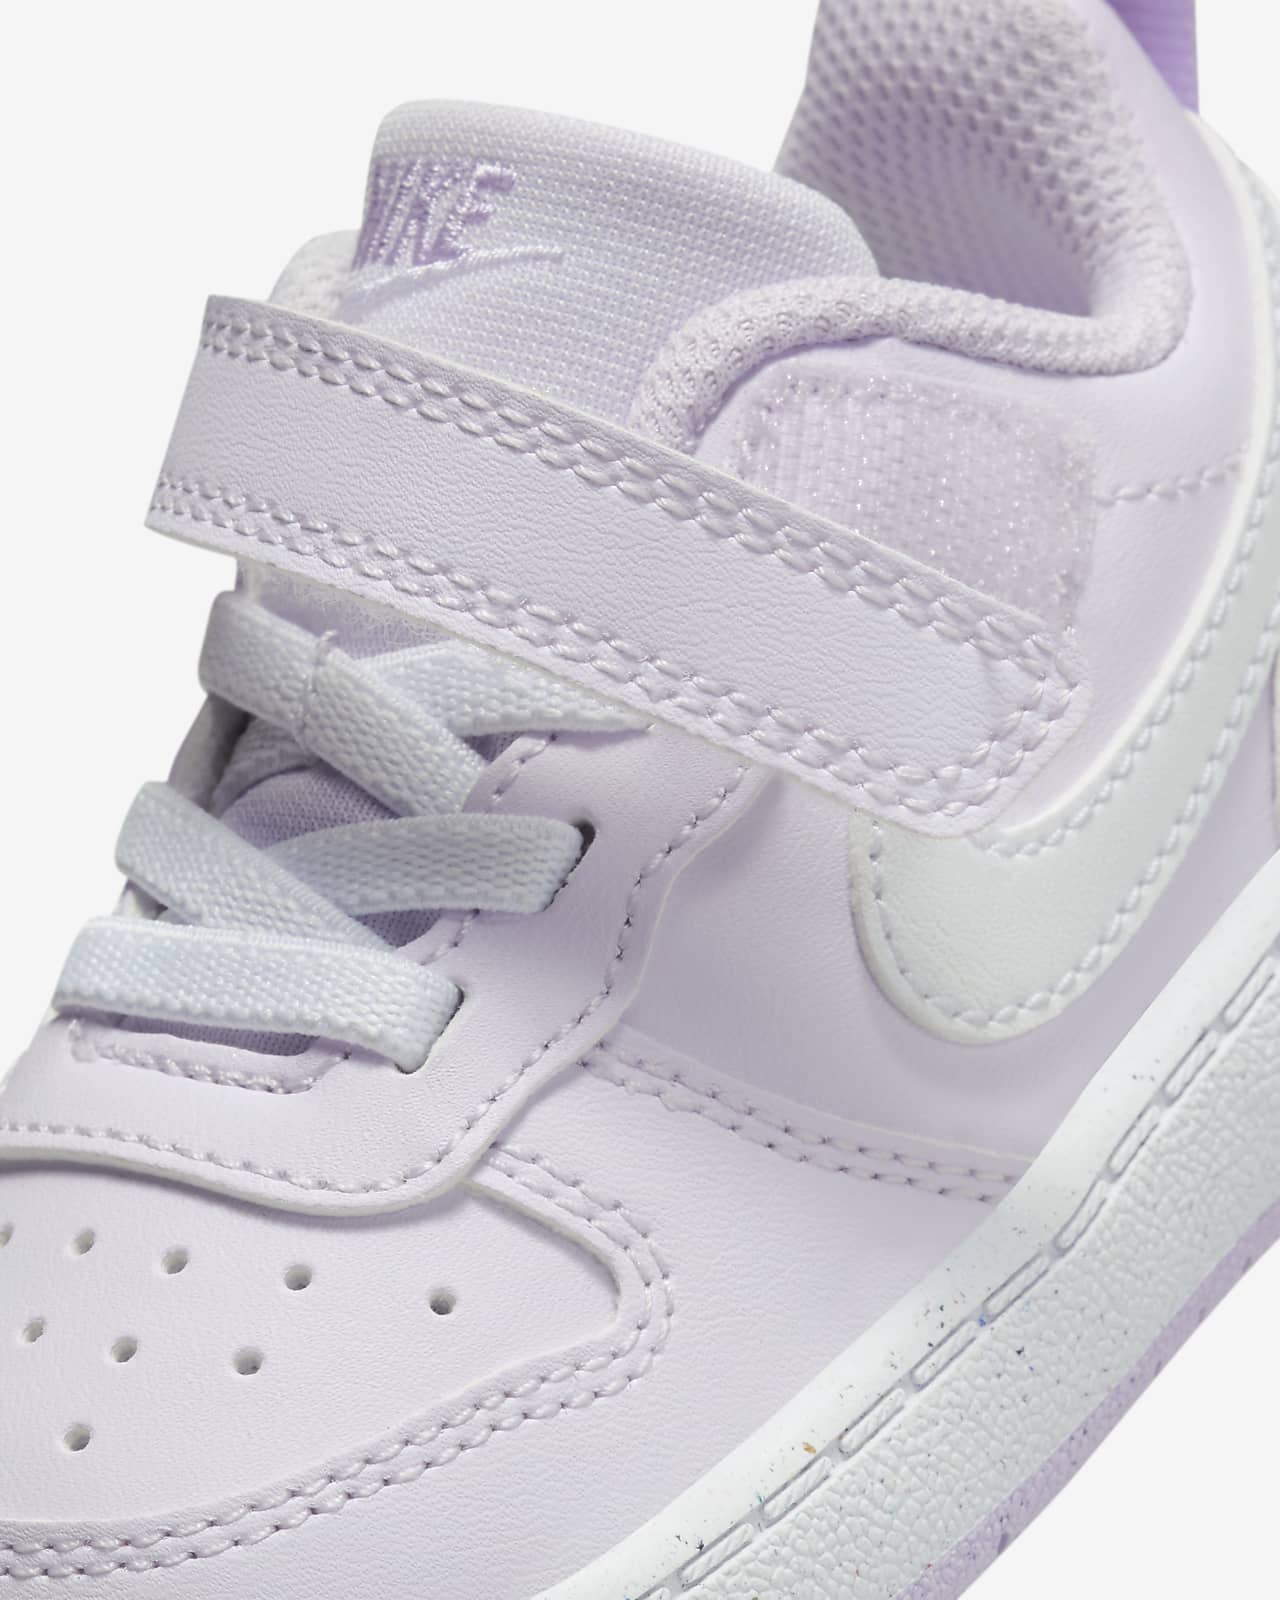 Nike Court Borough Recraft Shoes. Baby/Toddler Low